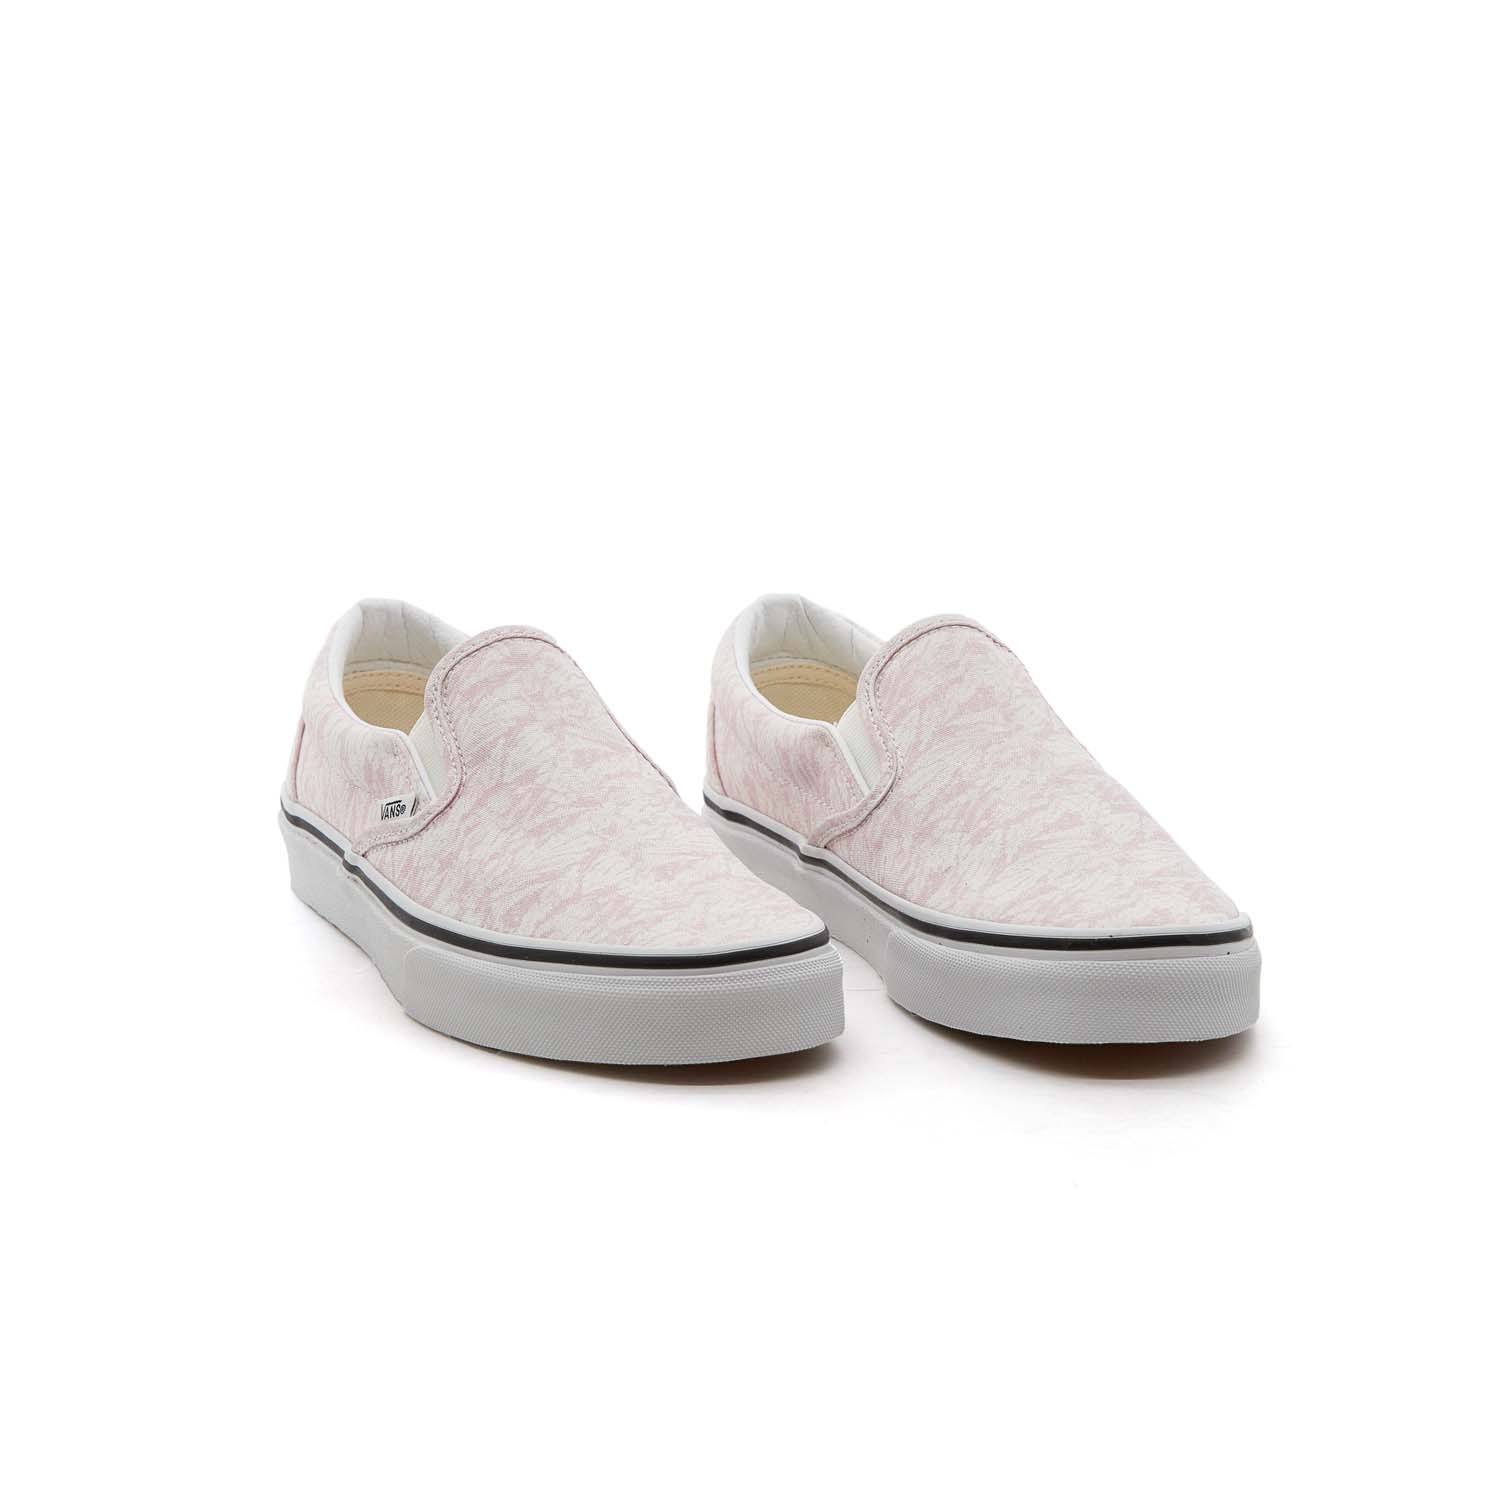 Vans Classic Slip On Washes Rosa